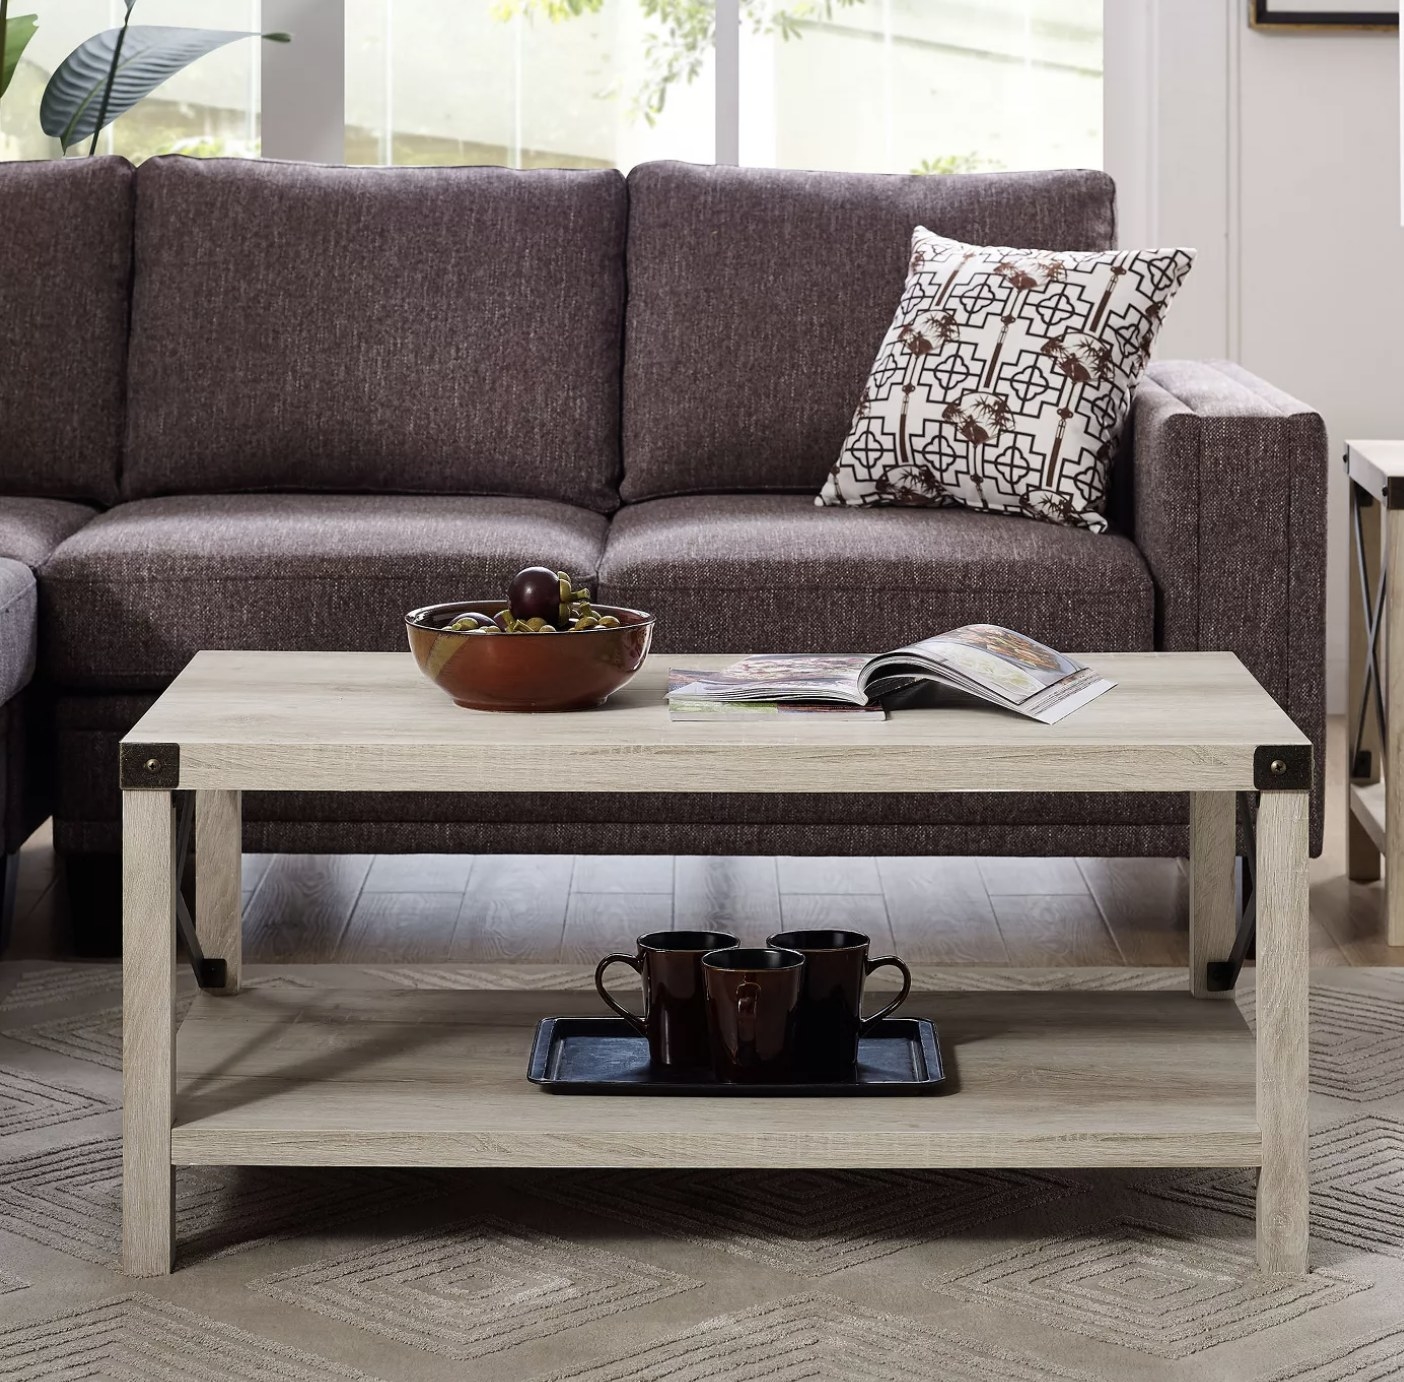 A light wood coffee table with decor on top in a living space